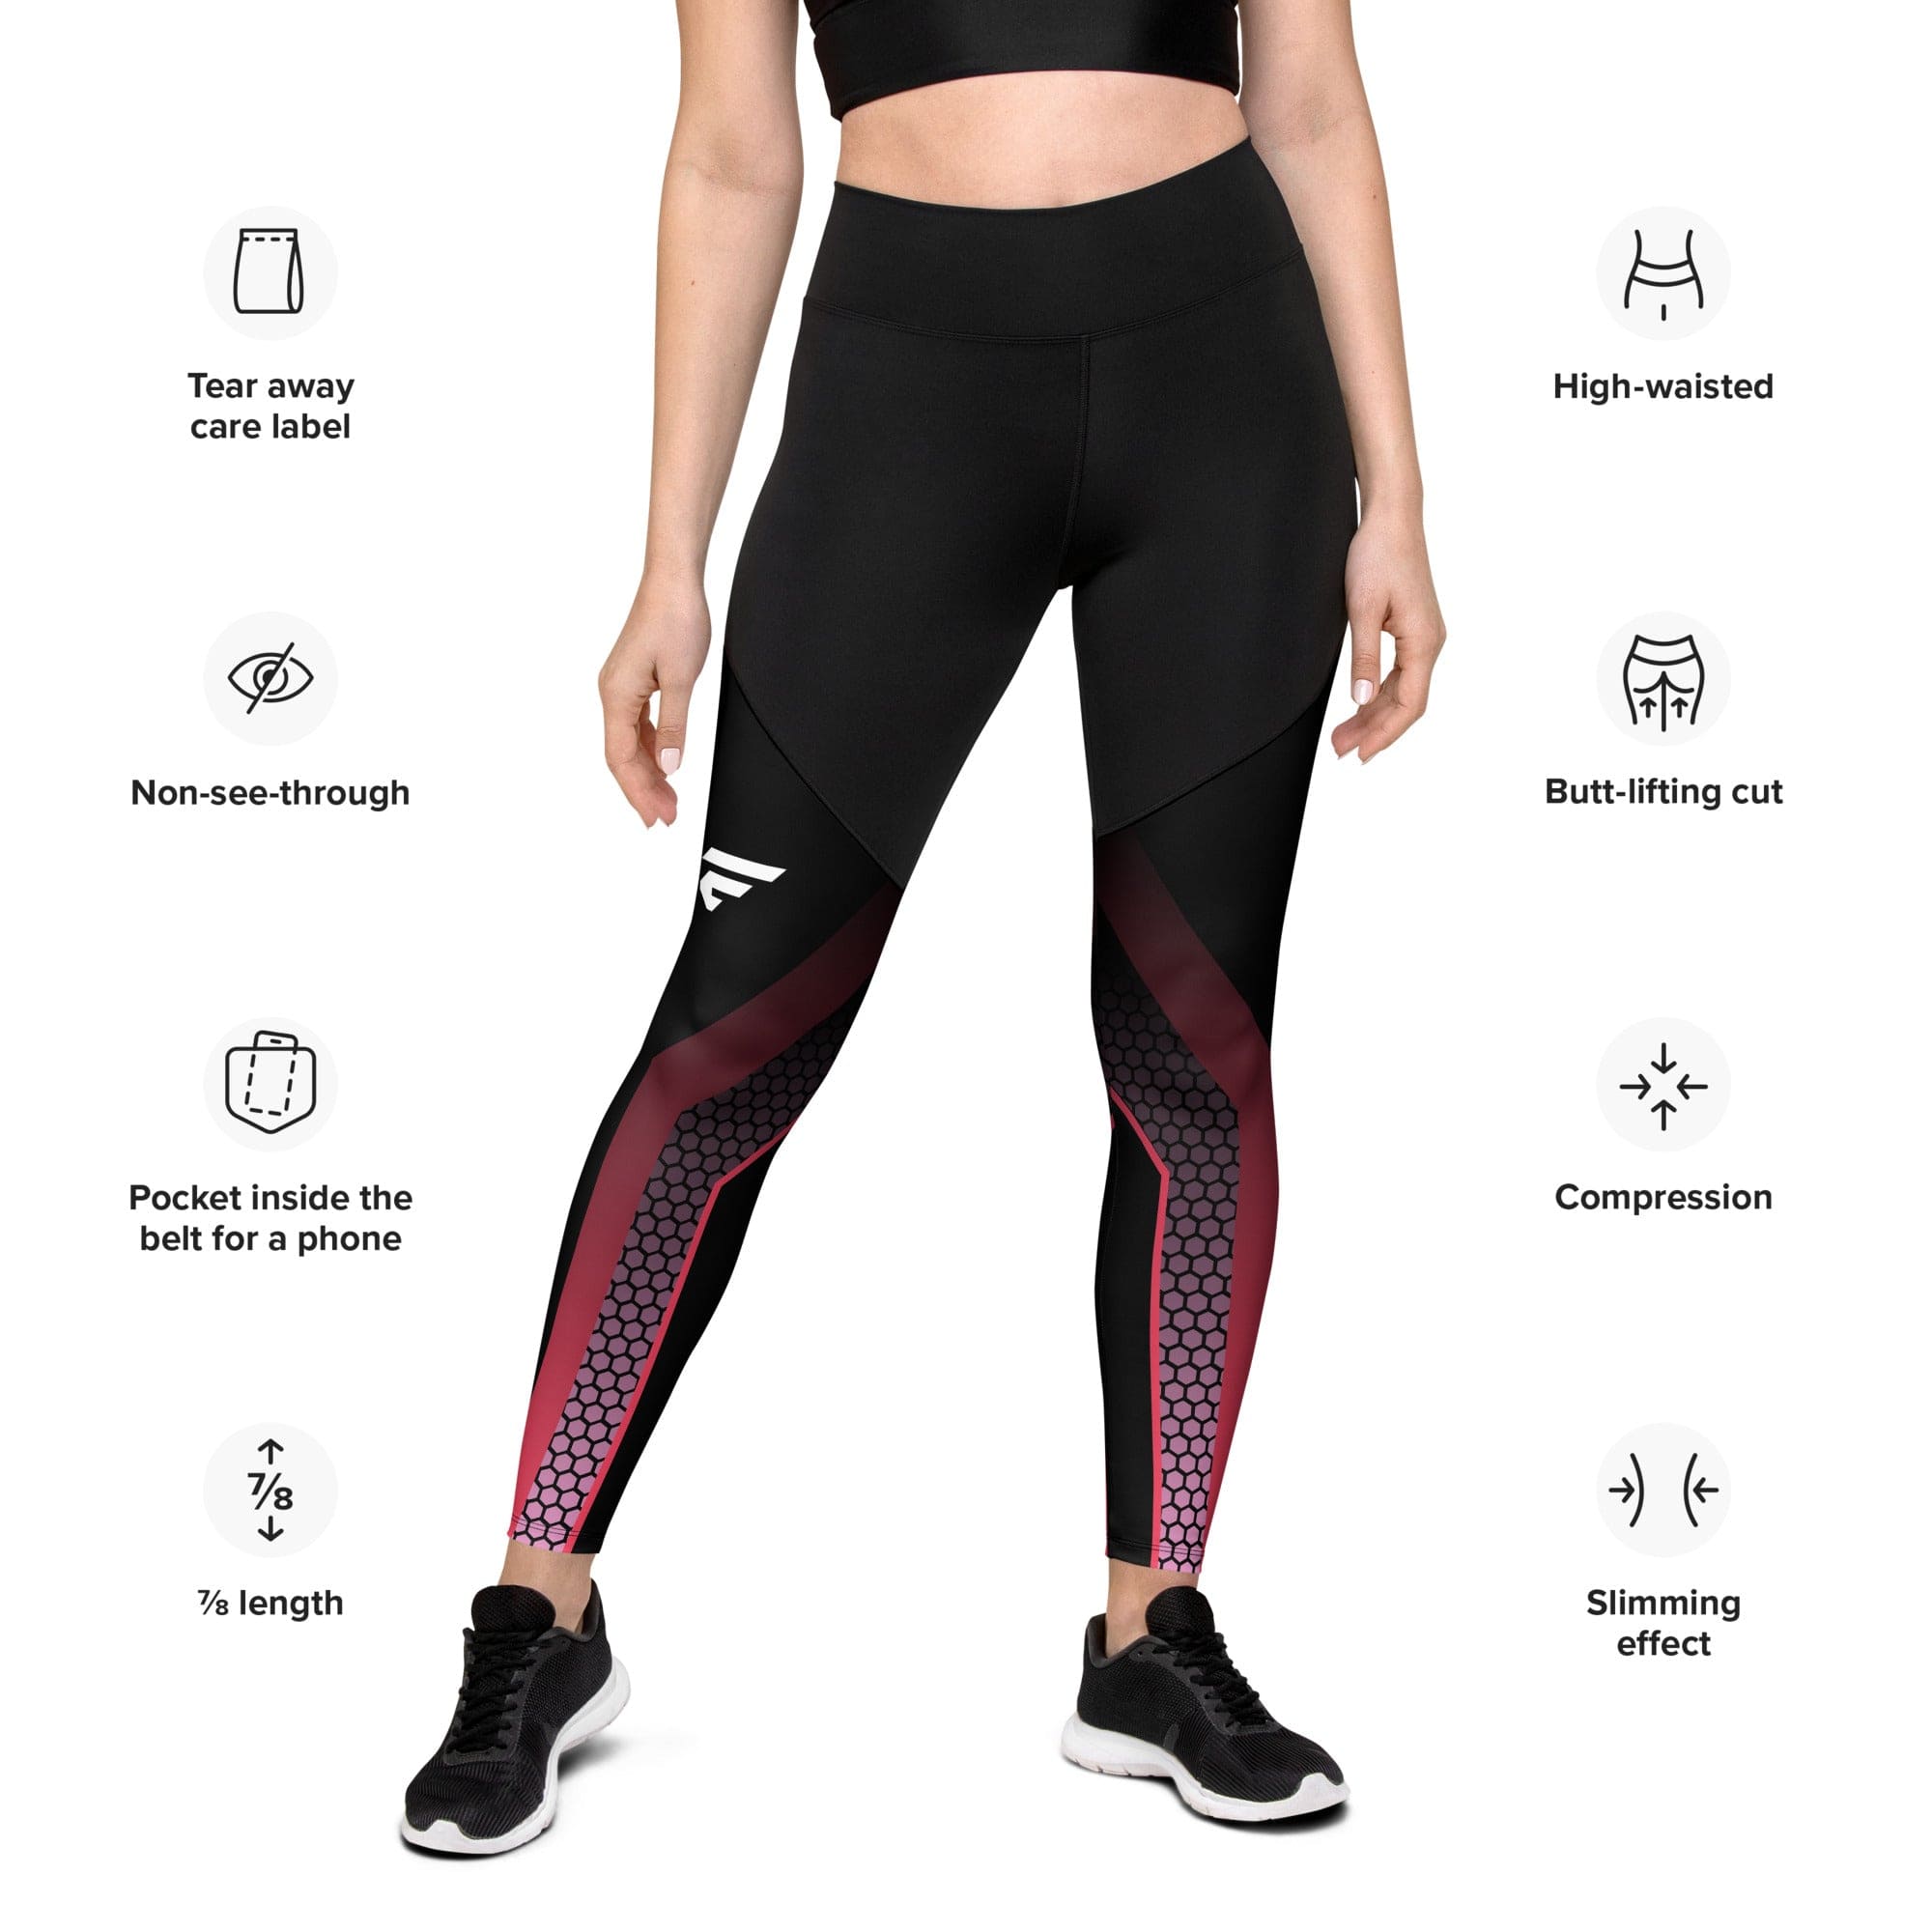 crossover leggings with pockets - black